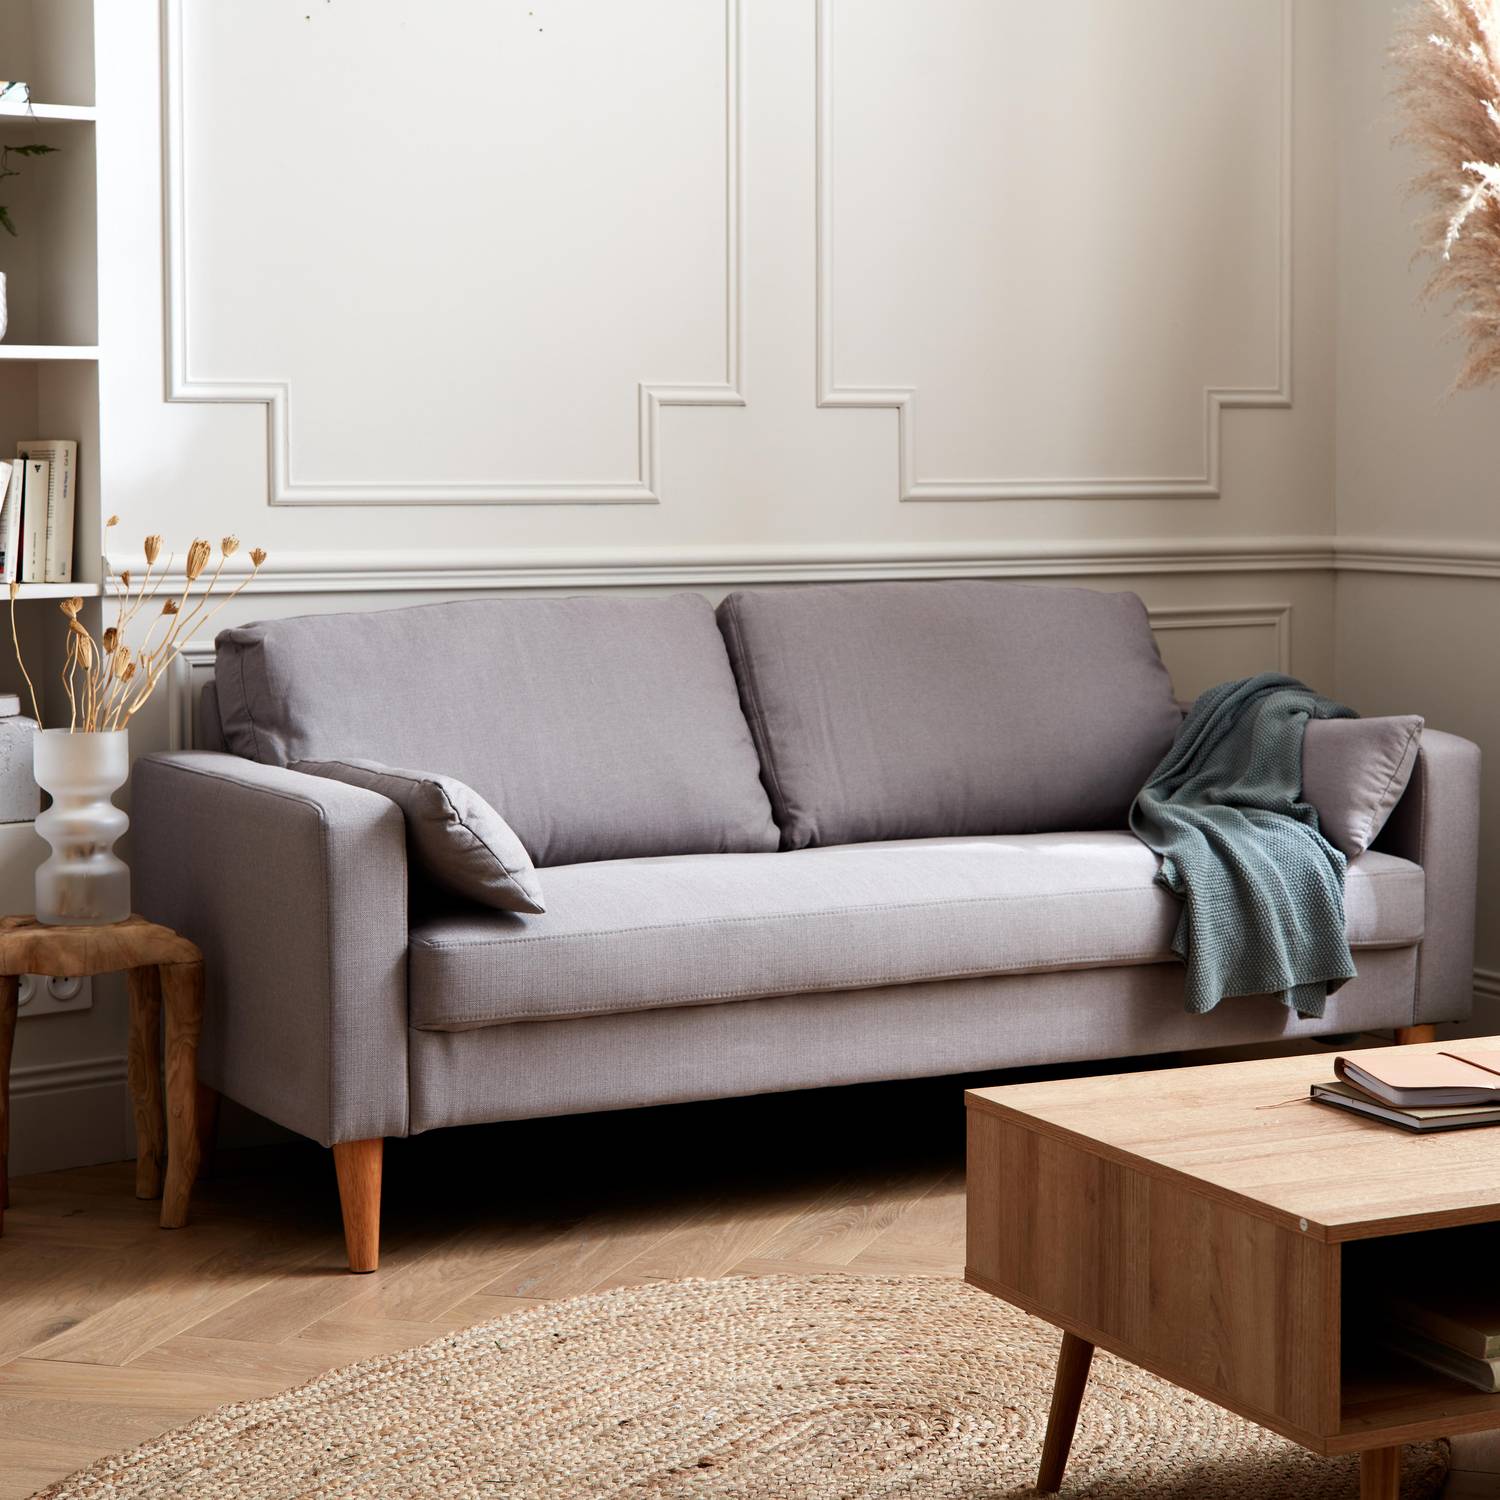 Large 3-seater sofa Scandi-style with wooden legs - Bjorn - Light Grey Photo1